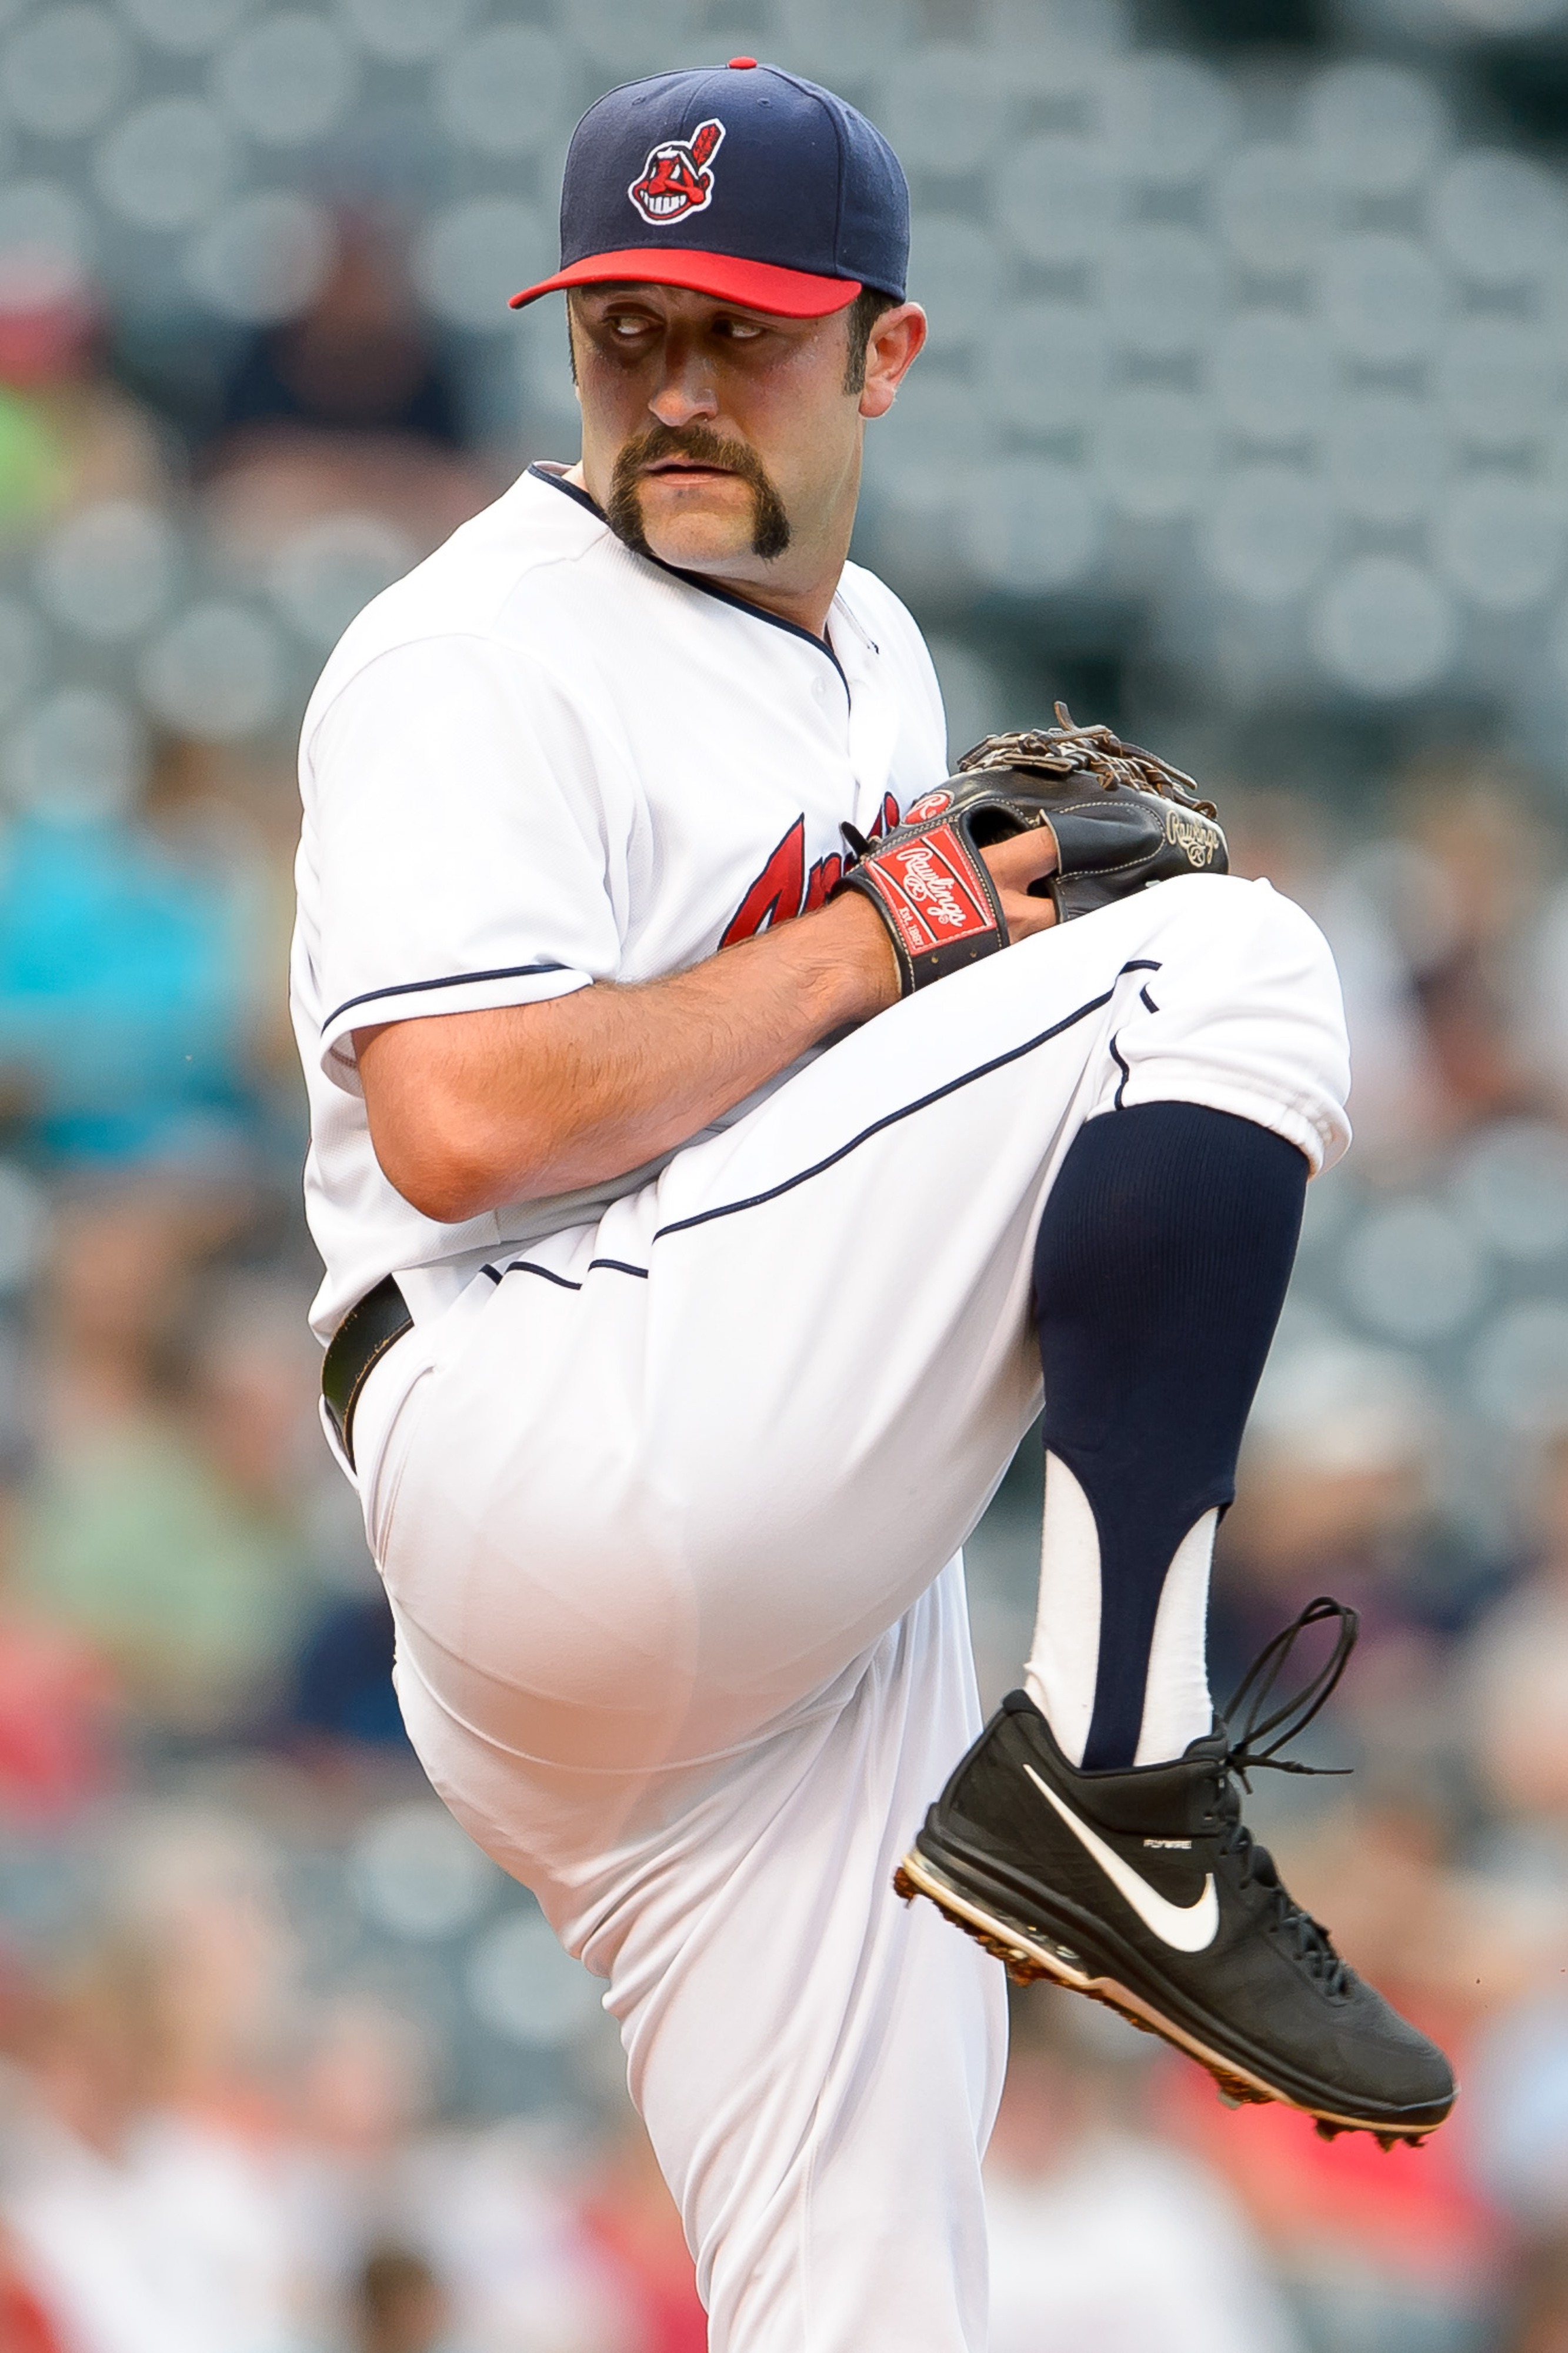 T.J. House also probably had the best mustache on the roster this year.